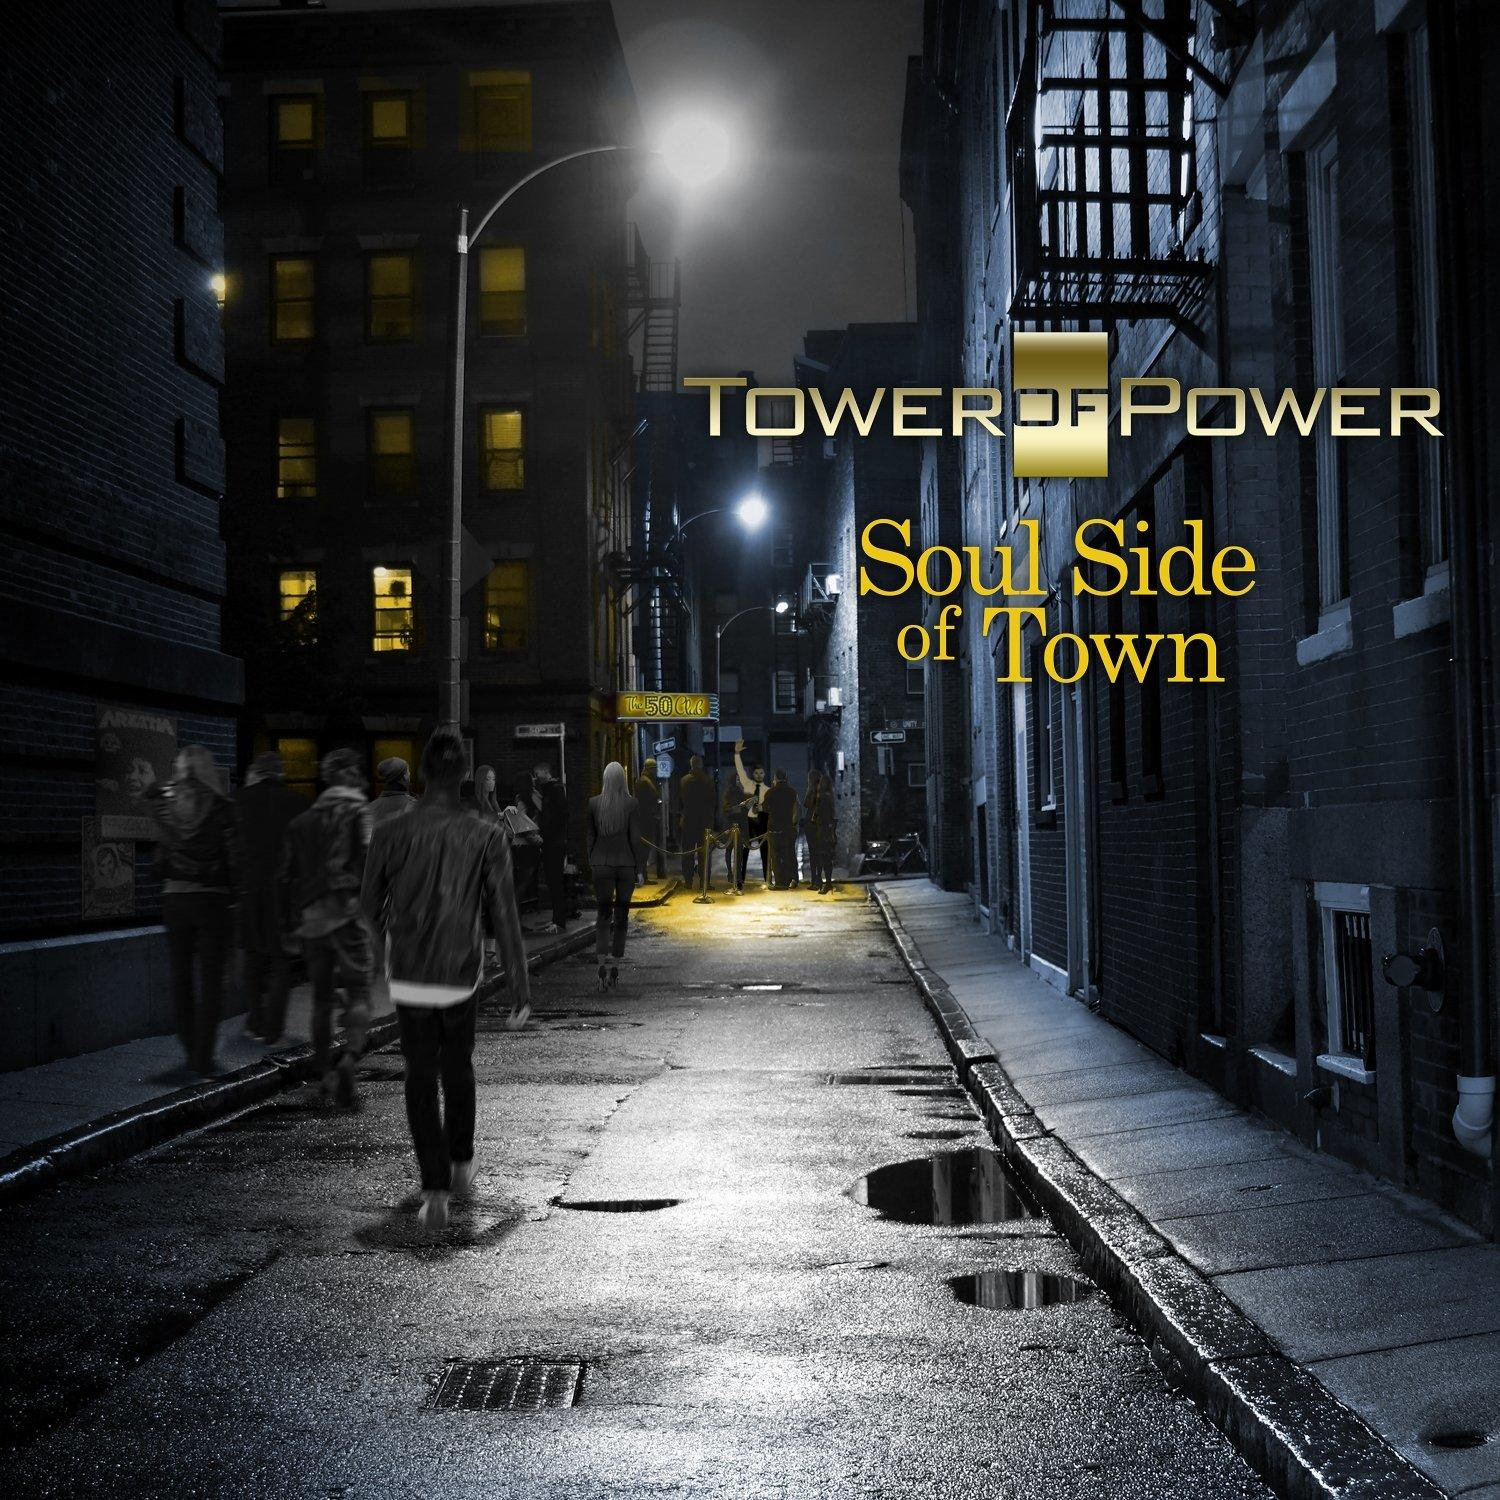 Town of Power Tower - Side (CD) - Soul Of